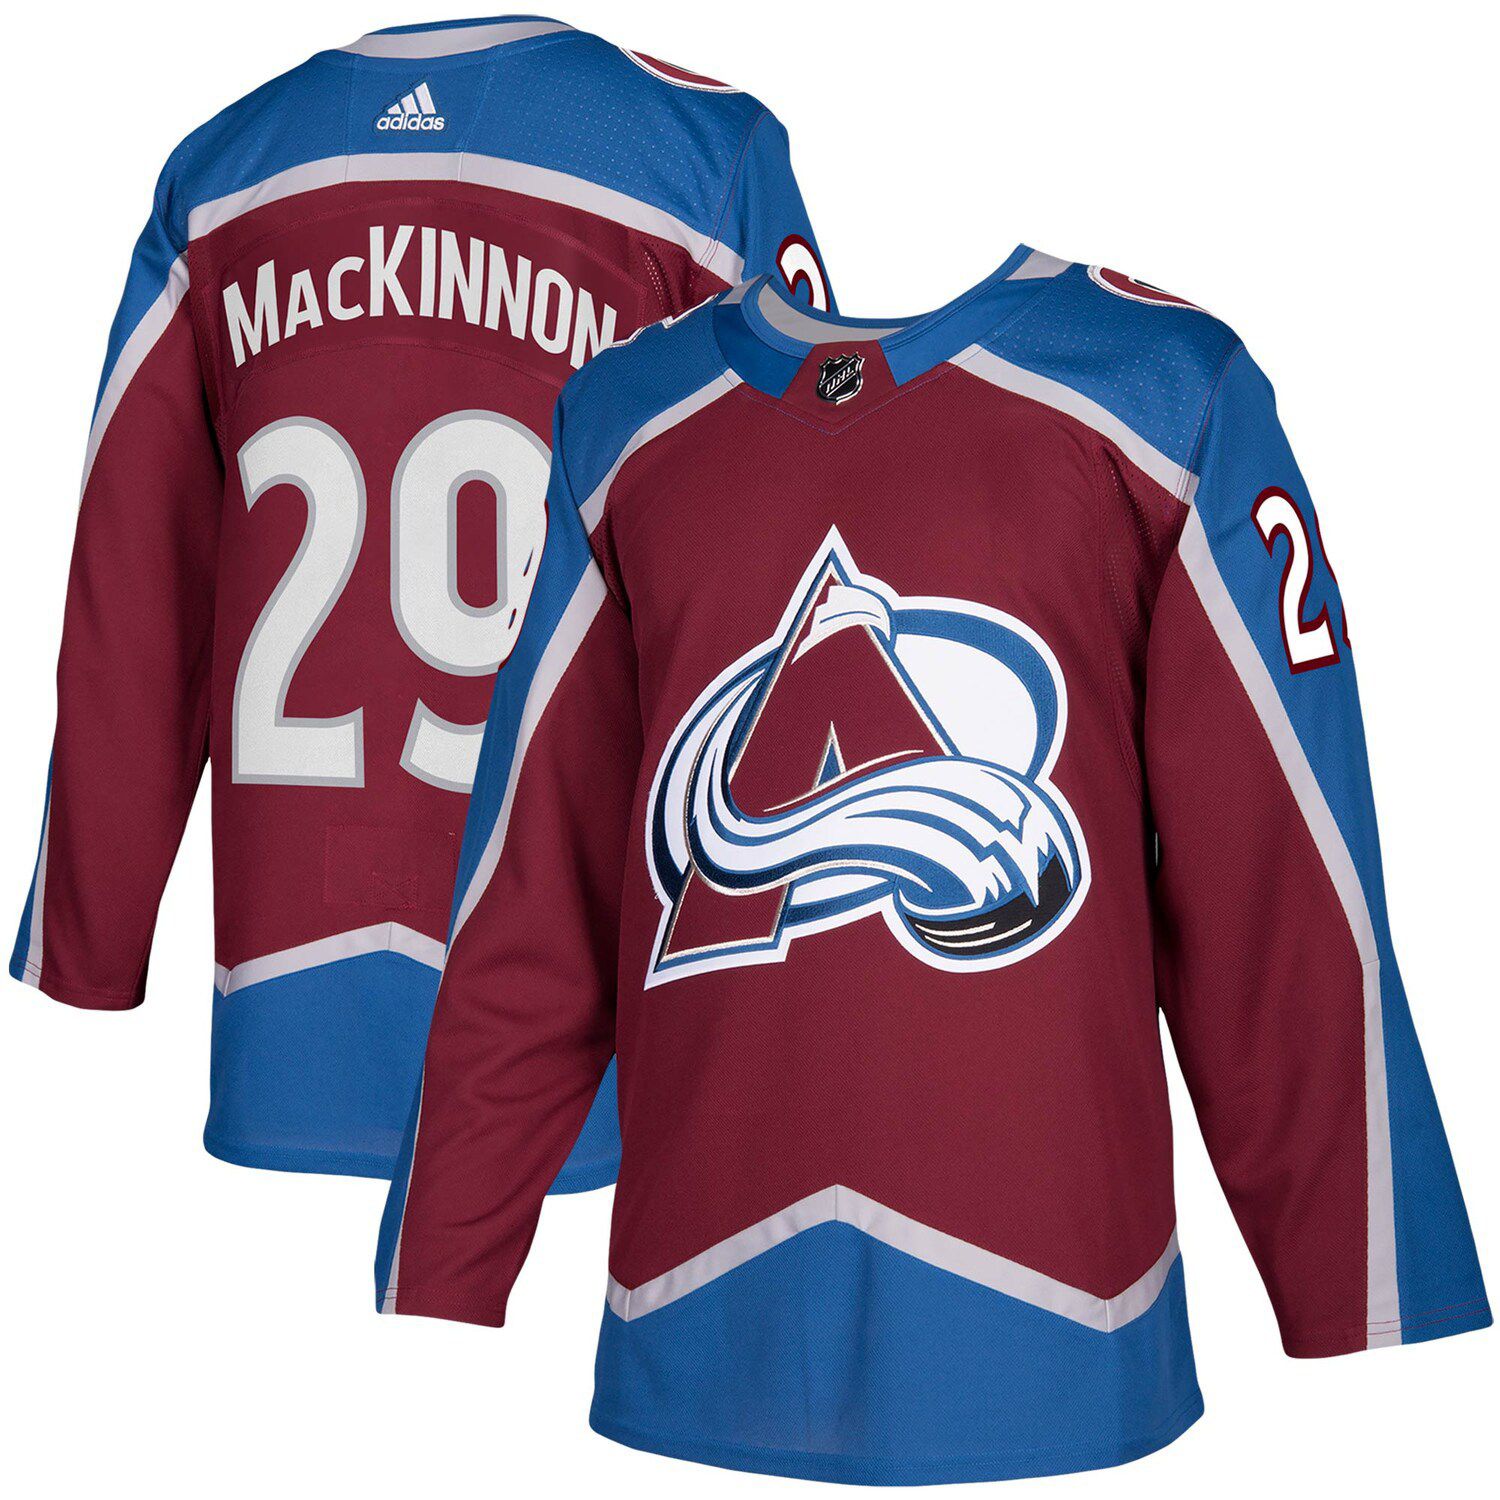 nathan mackinnon authentic jersey